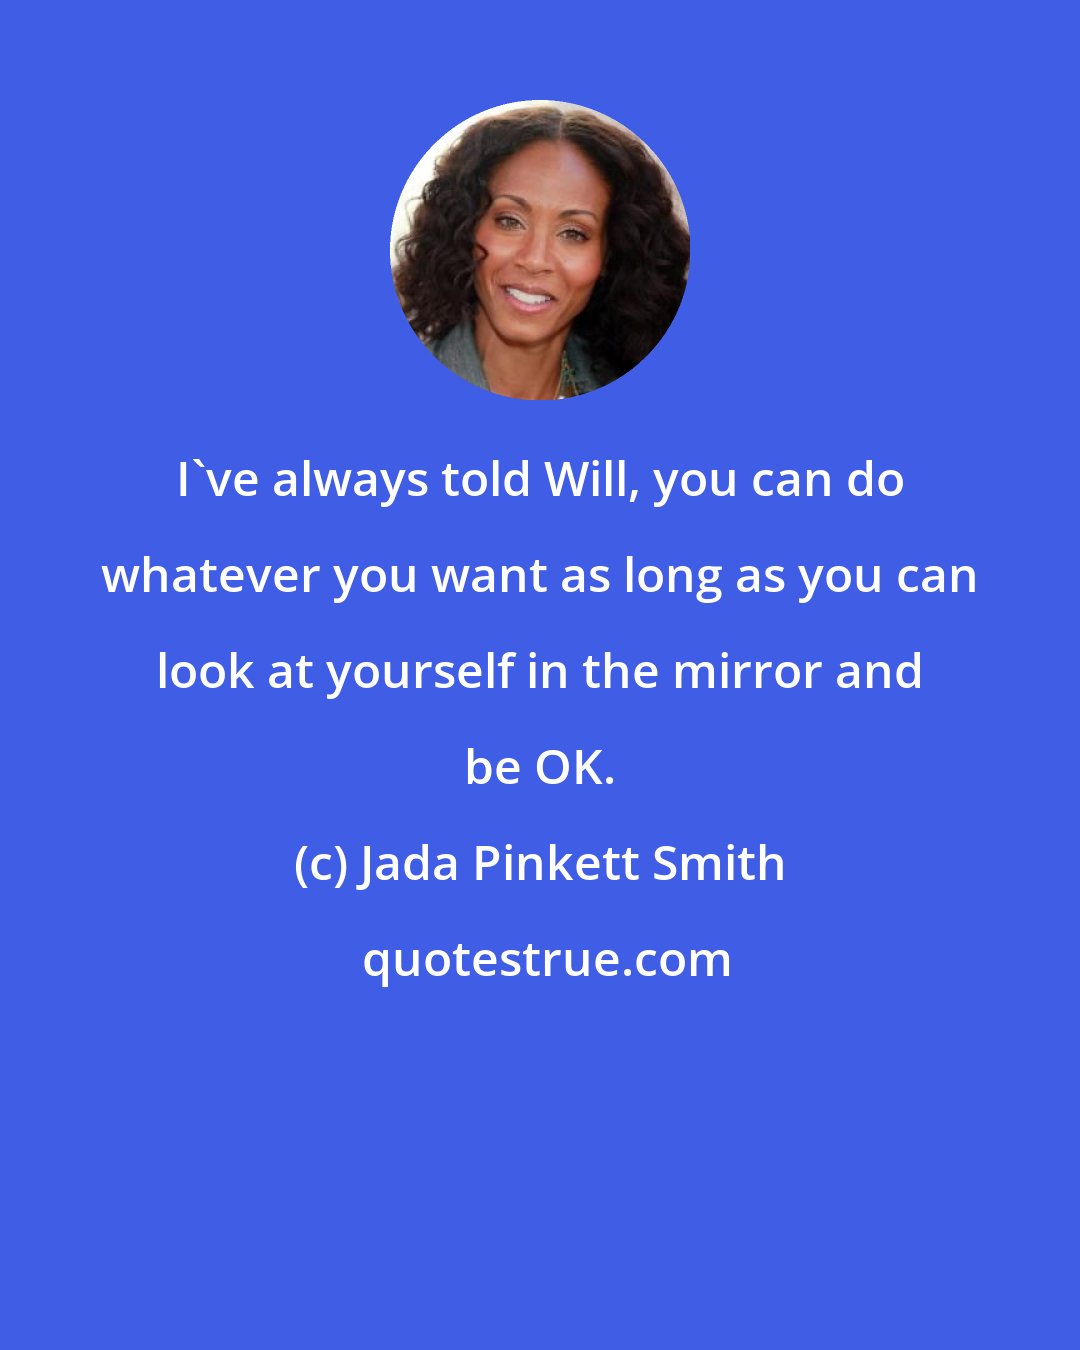 Jada Pinkett Smith: I've always told Will, you can do whatever you want as long as you can look at yourself in the mirror and be OK.